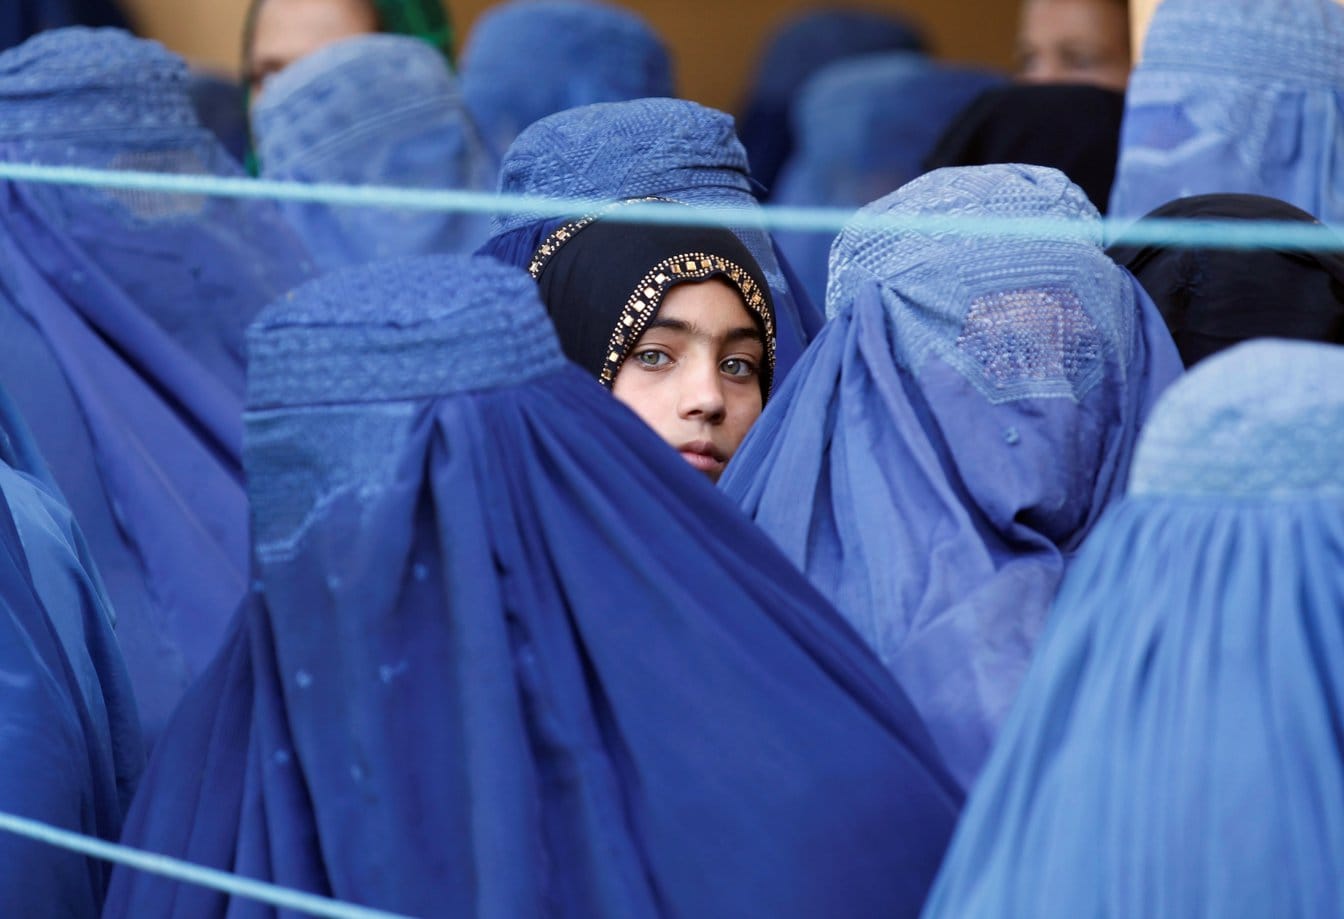 Countries retreating from Afghanistan show little concern for the dark future they are leaving behind for women and girls. Let us not look away.